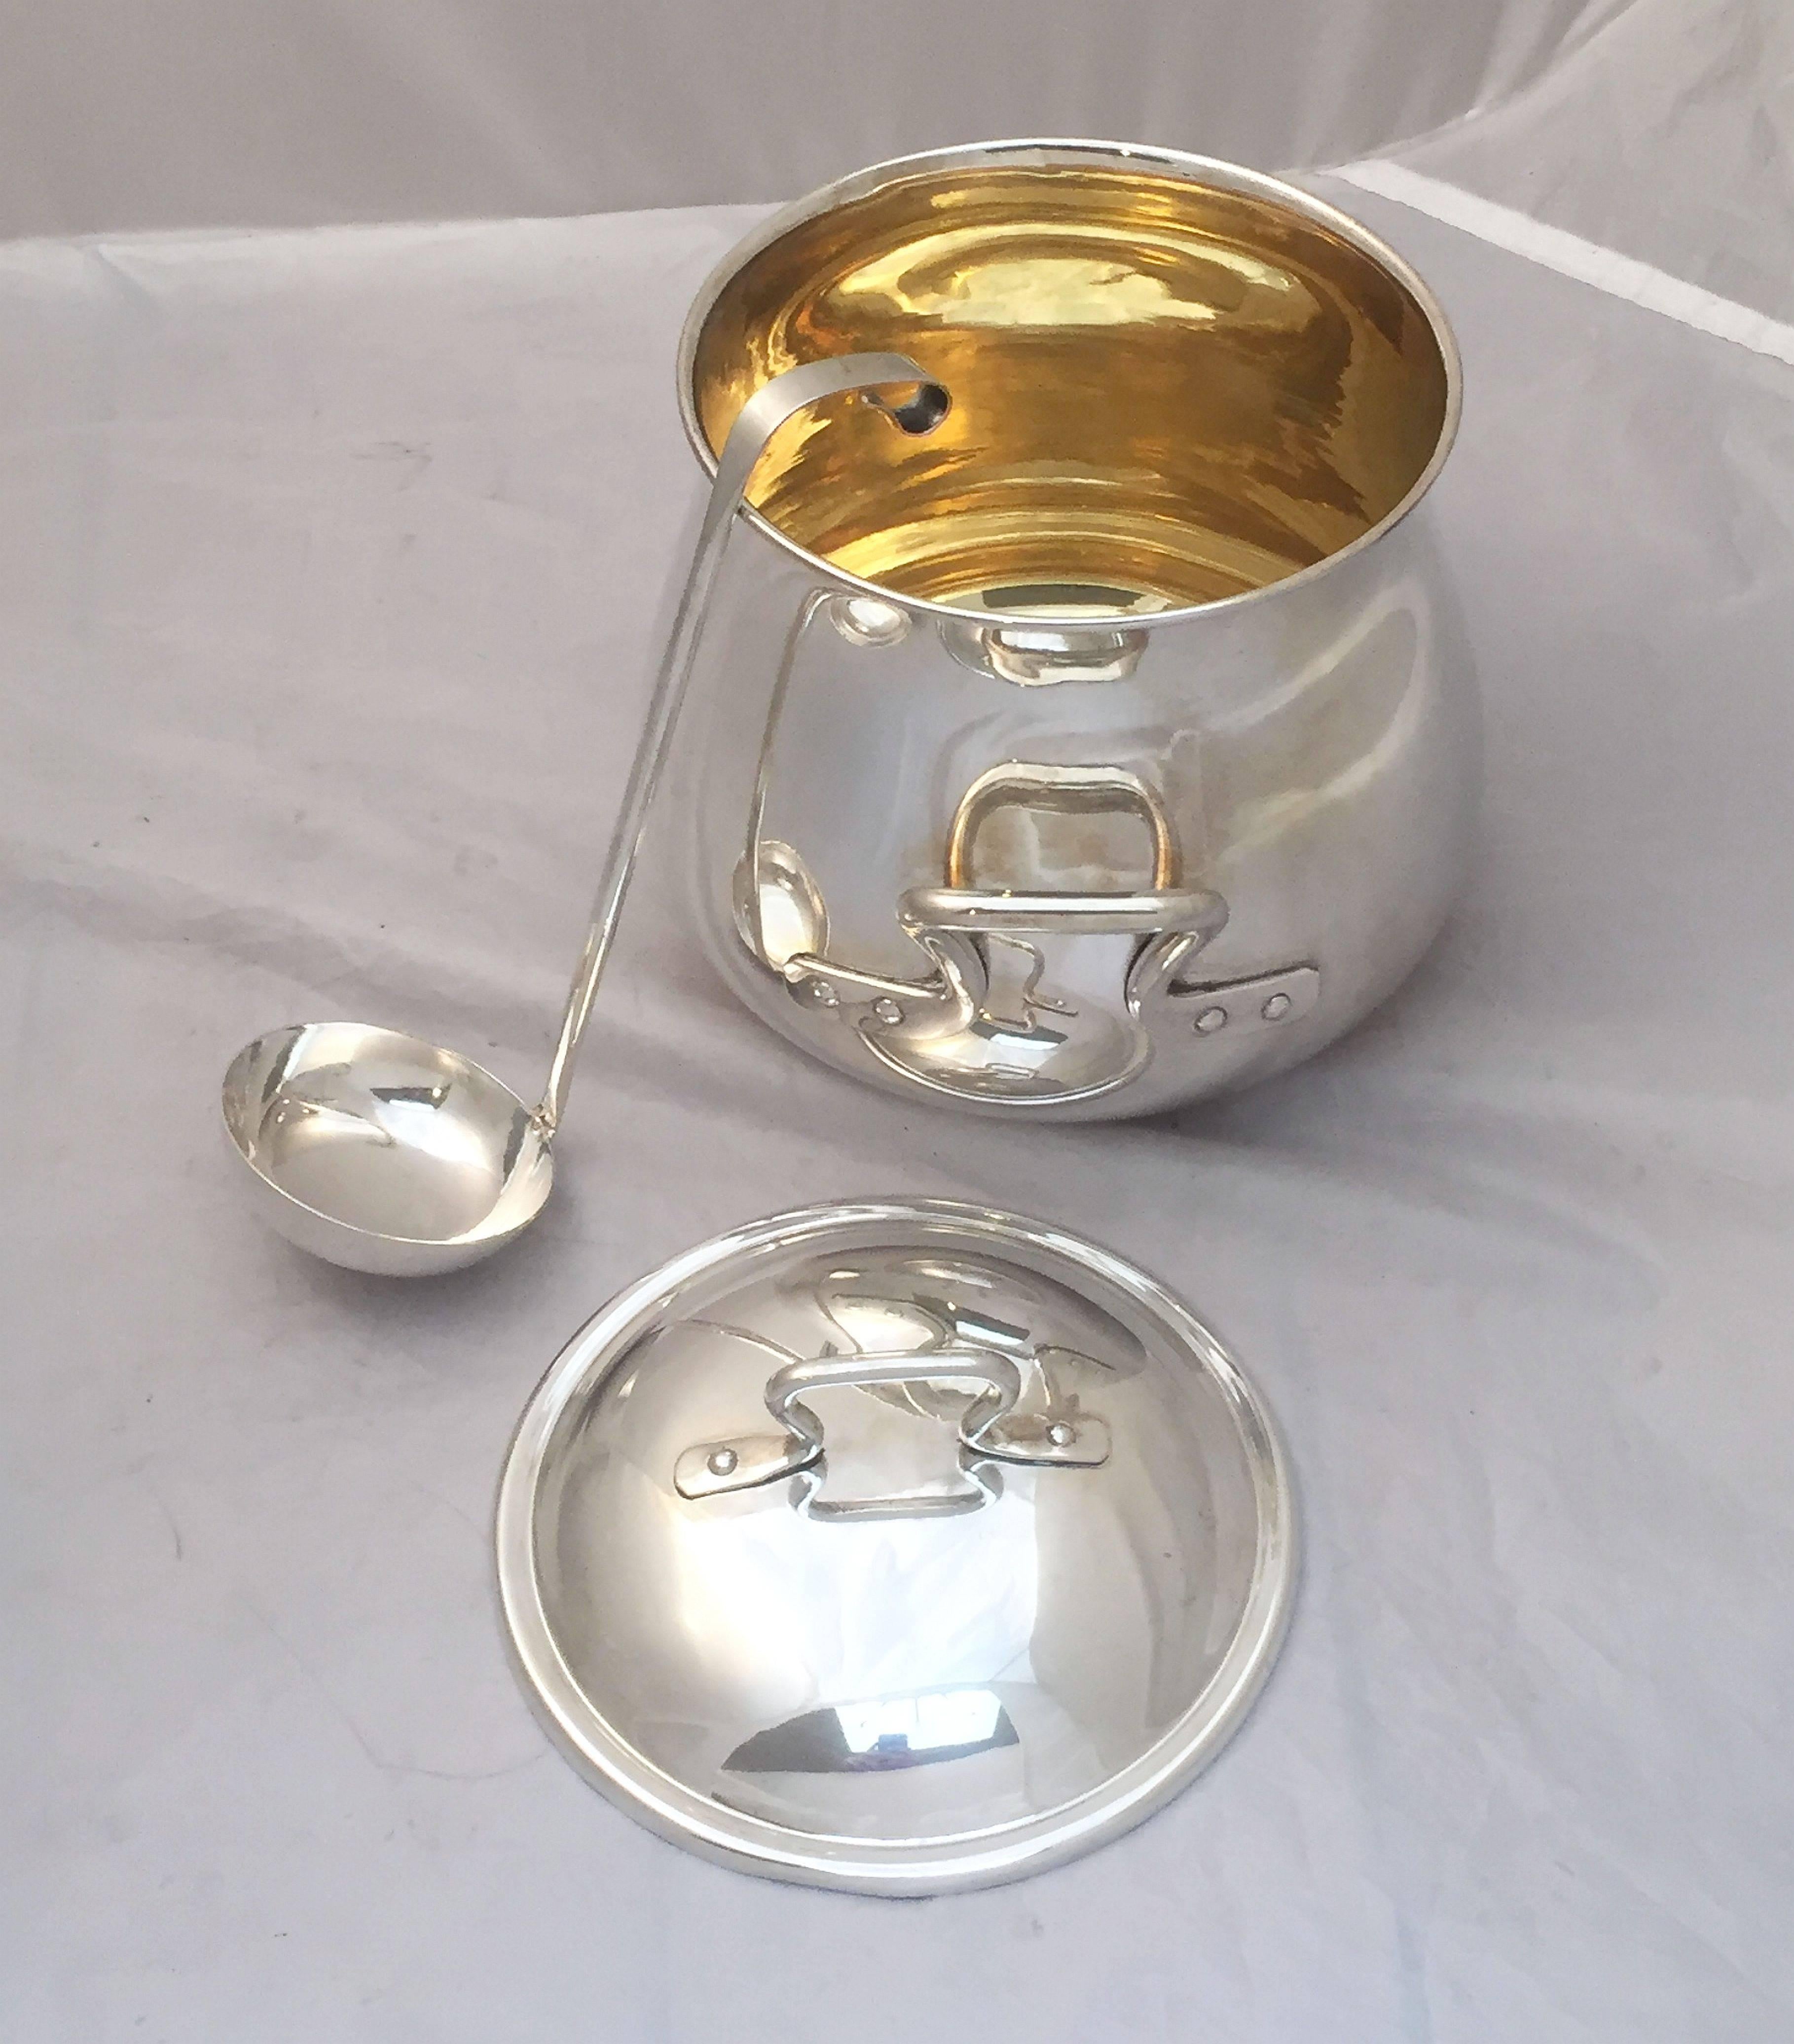 A fine French silver serving bowl or tureen with lid and ladle, featuring a bowl with two opposing handles and gold-washed interior, circular lid or top with handle, and stylish ladle.

Marked 800 silver on bowl base.